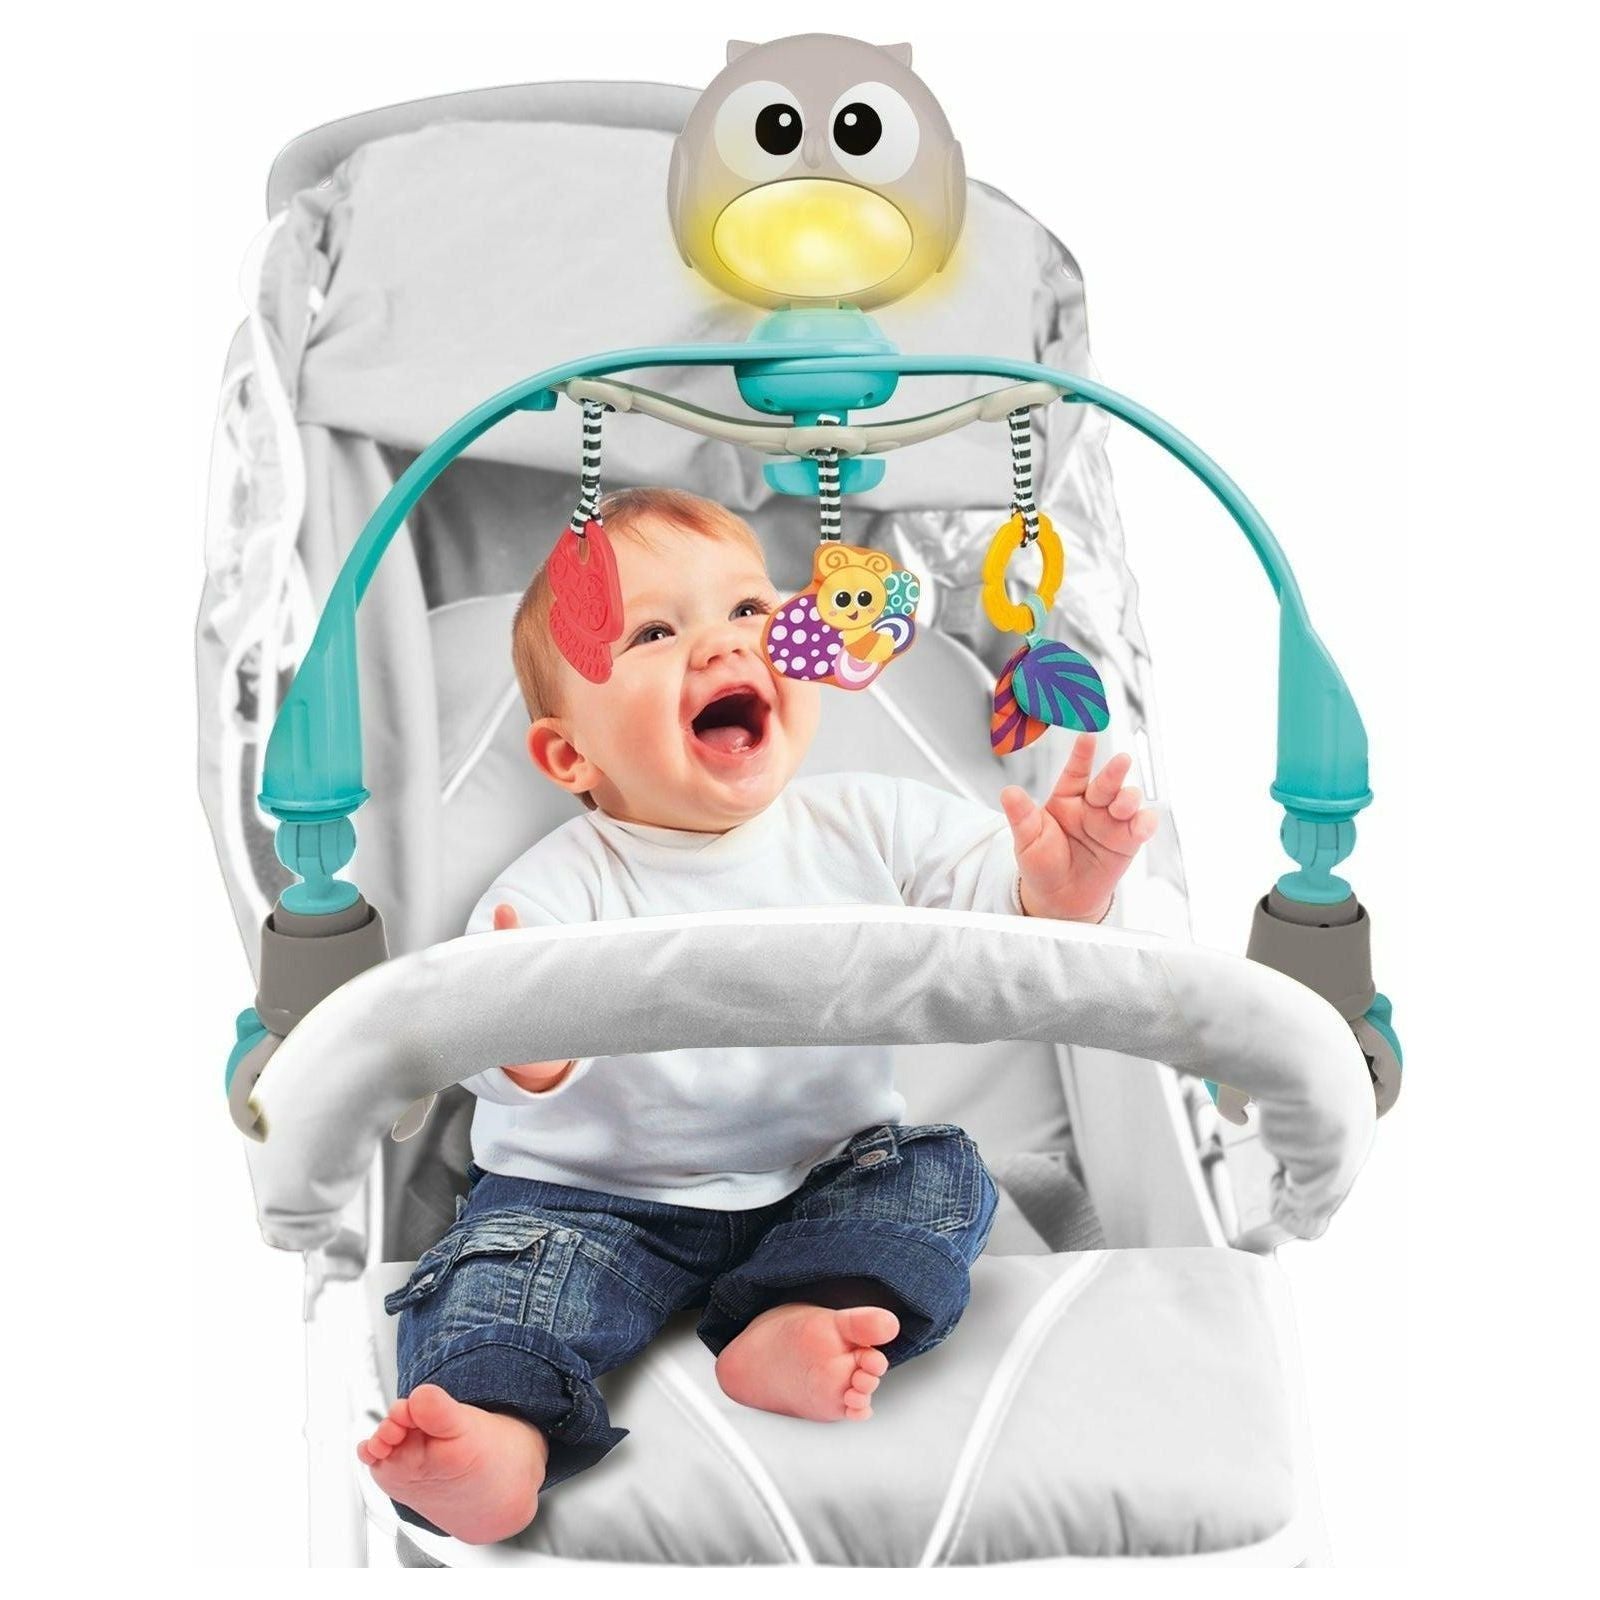 WinFun 2-In-1 Melody Fun Arch with Sounds & Lights - BumbleToys - 0-24 Months, arch, Babies, Baby Saftey & Health, Boys, Cecil, Girls, Nursery Toys, Unisex